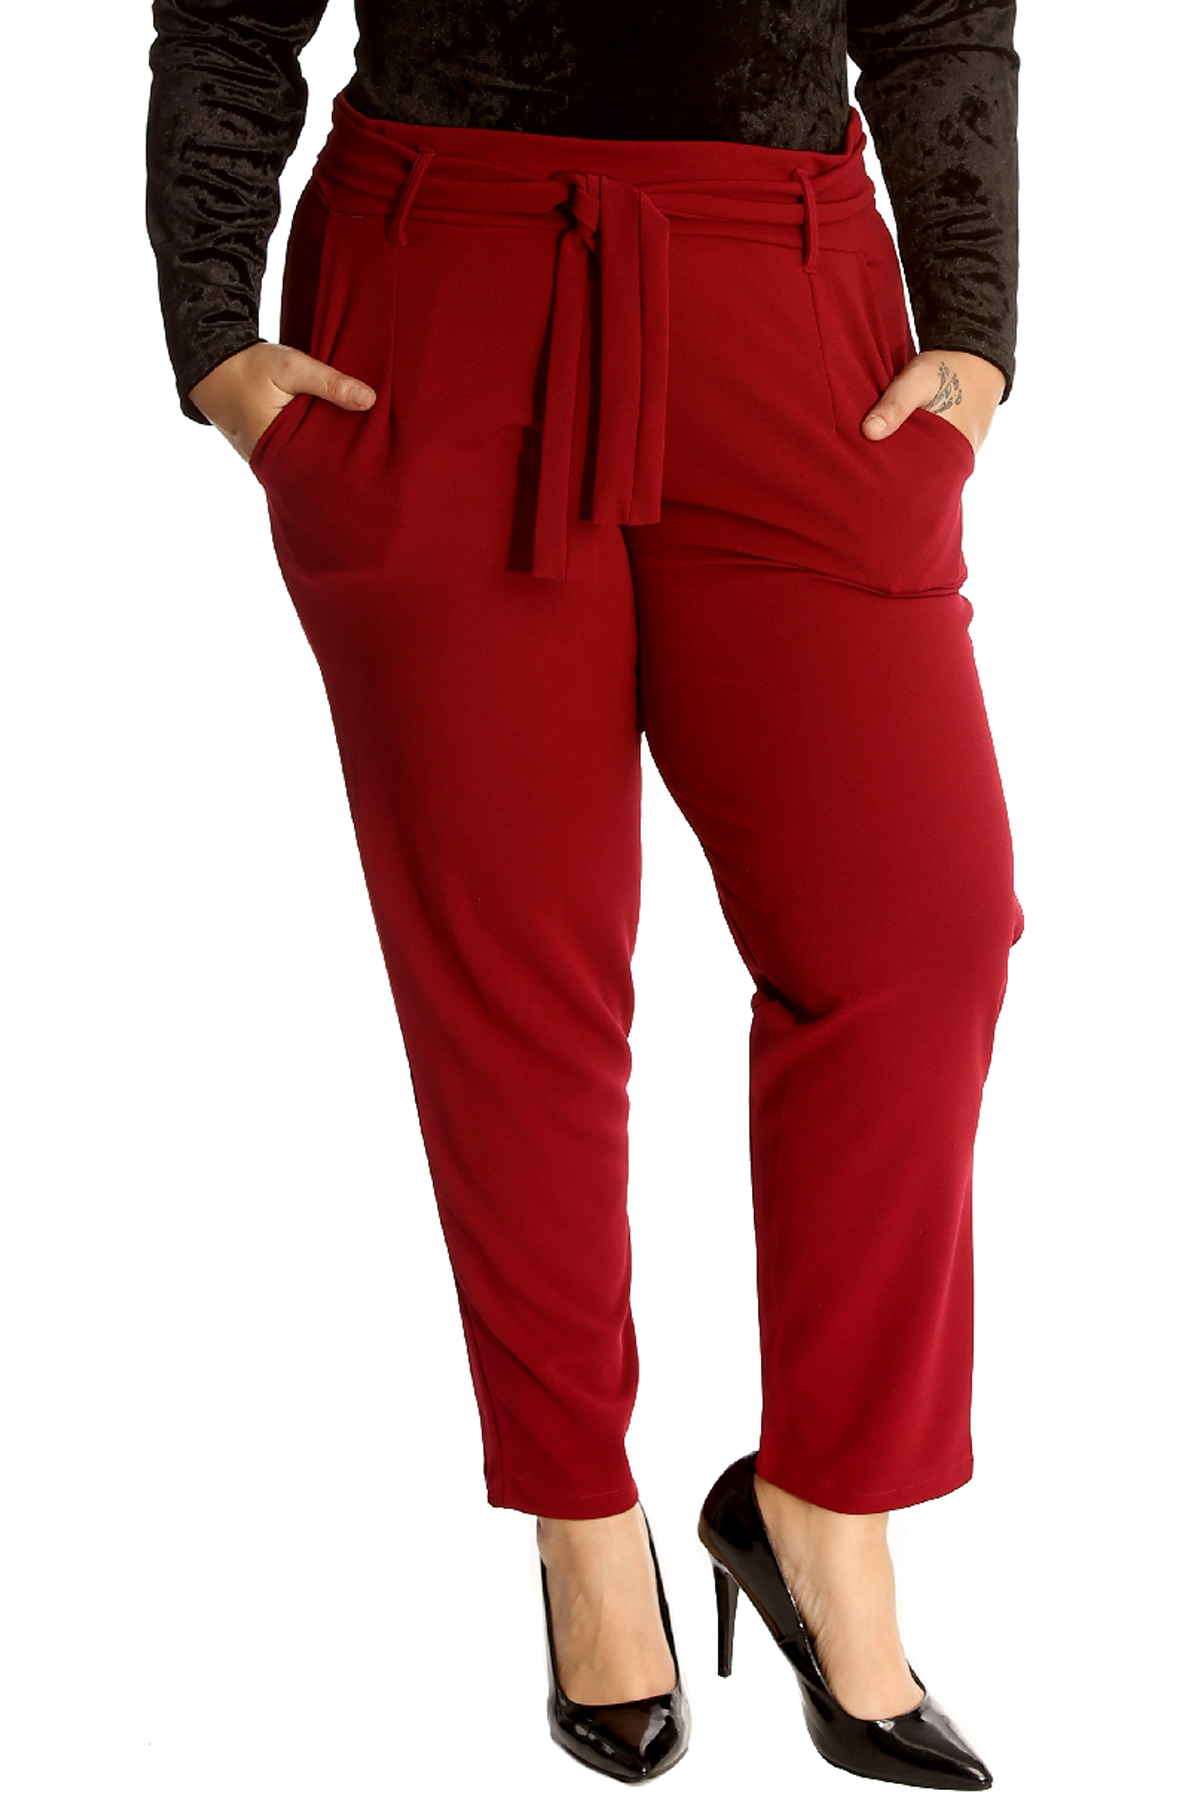 Womens Ladies Linen Trousers Plus Size Summer Pants Casual Holiday